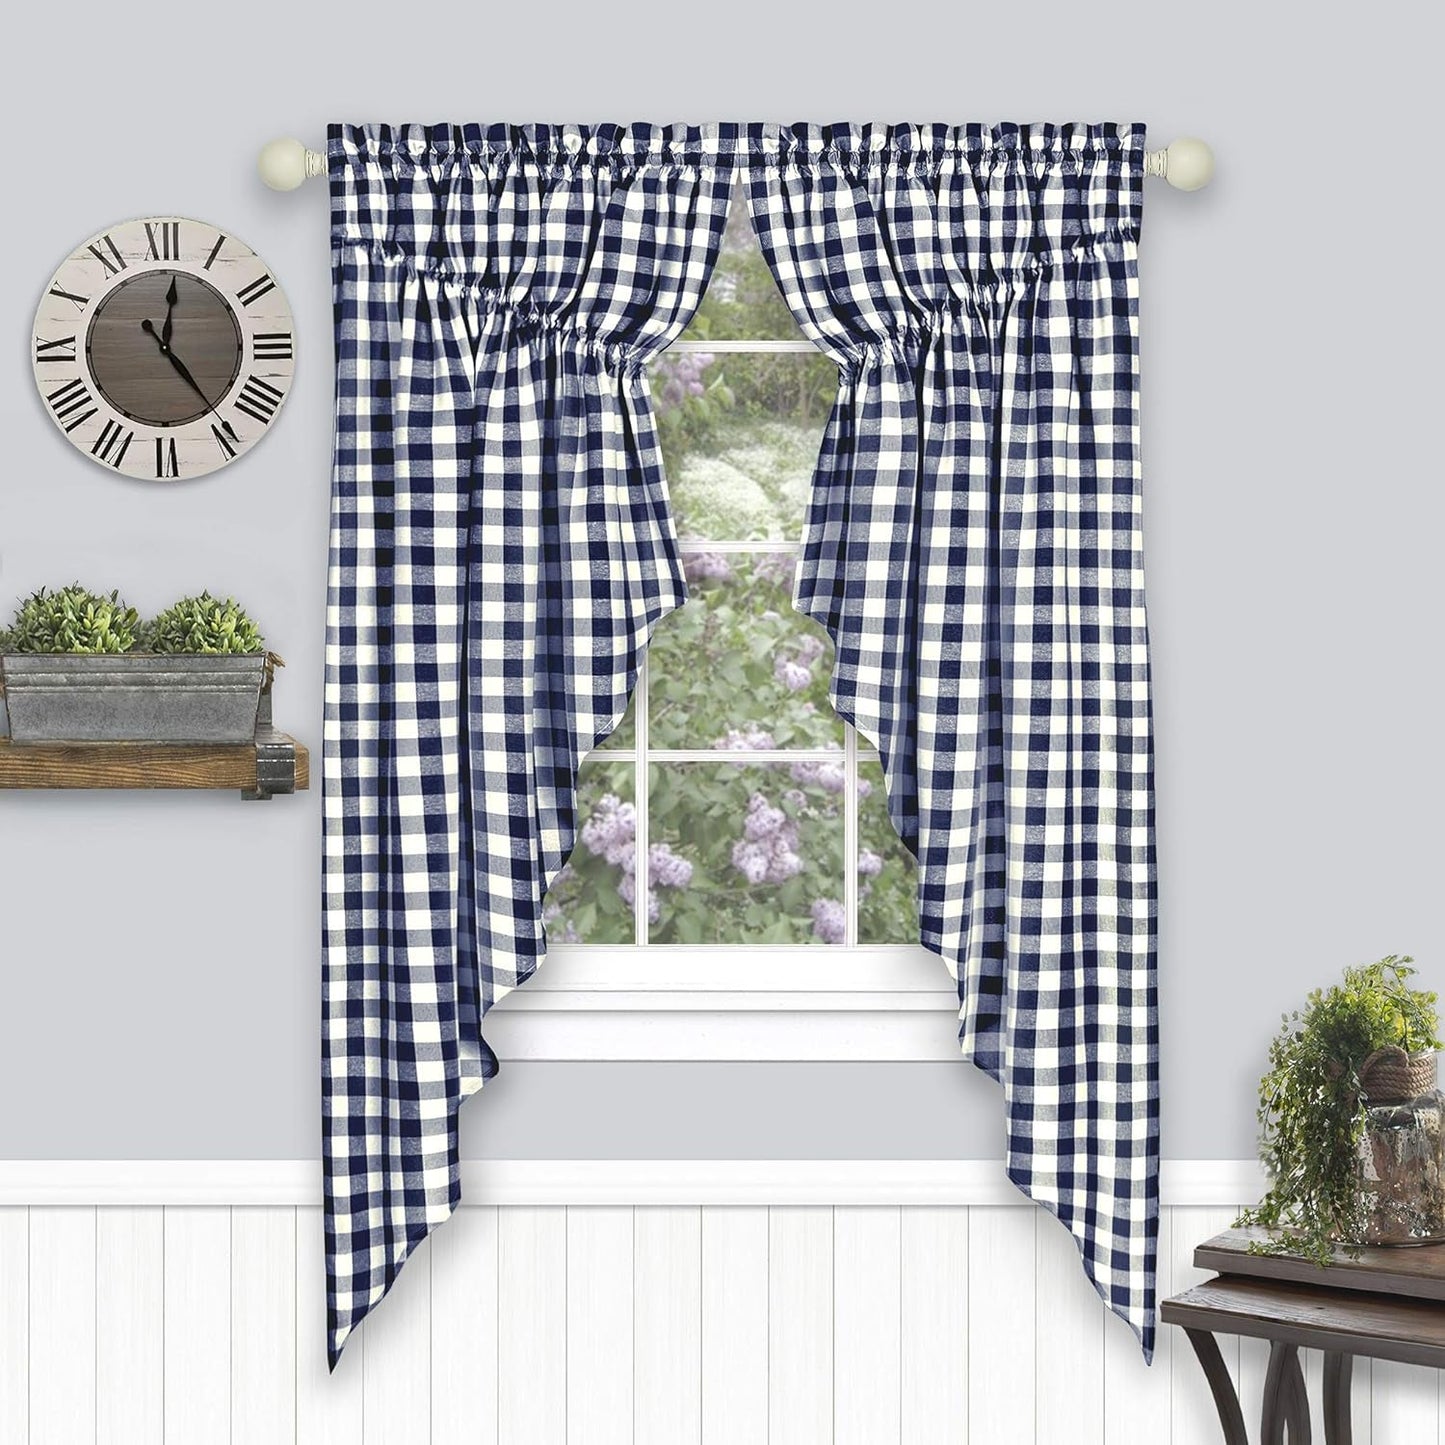 Goodgram 2 Pack Country Farmhouse Plaid Gingham Check Swag Valance Curtain Panels- Assorted Colors (Burgundy)